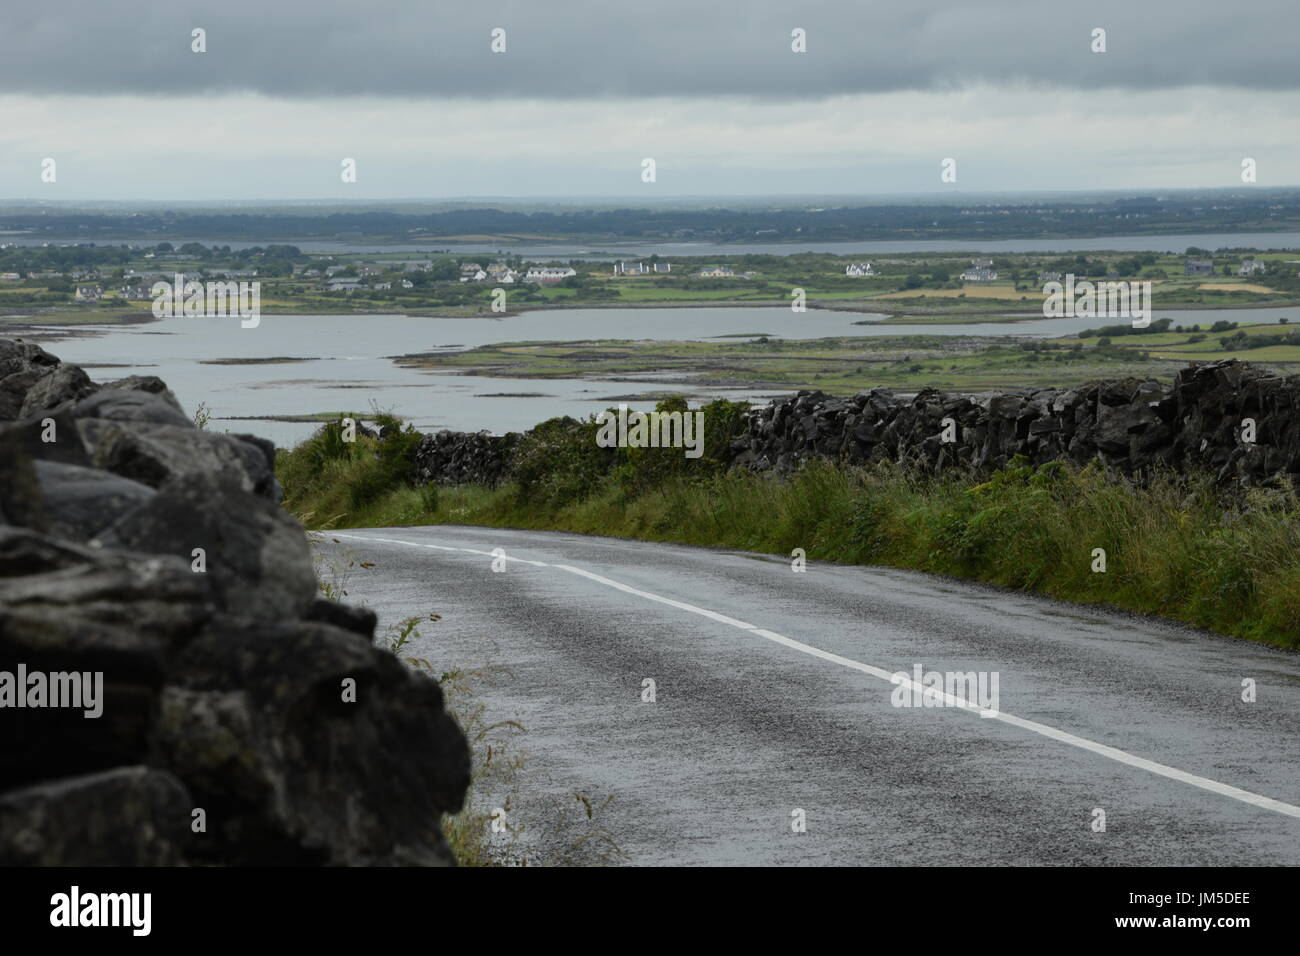 Asphalt road between the stone walls on the background of the Galway Bay in the County Clare, west Ireland Stock Photo